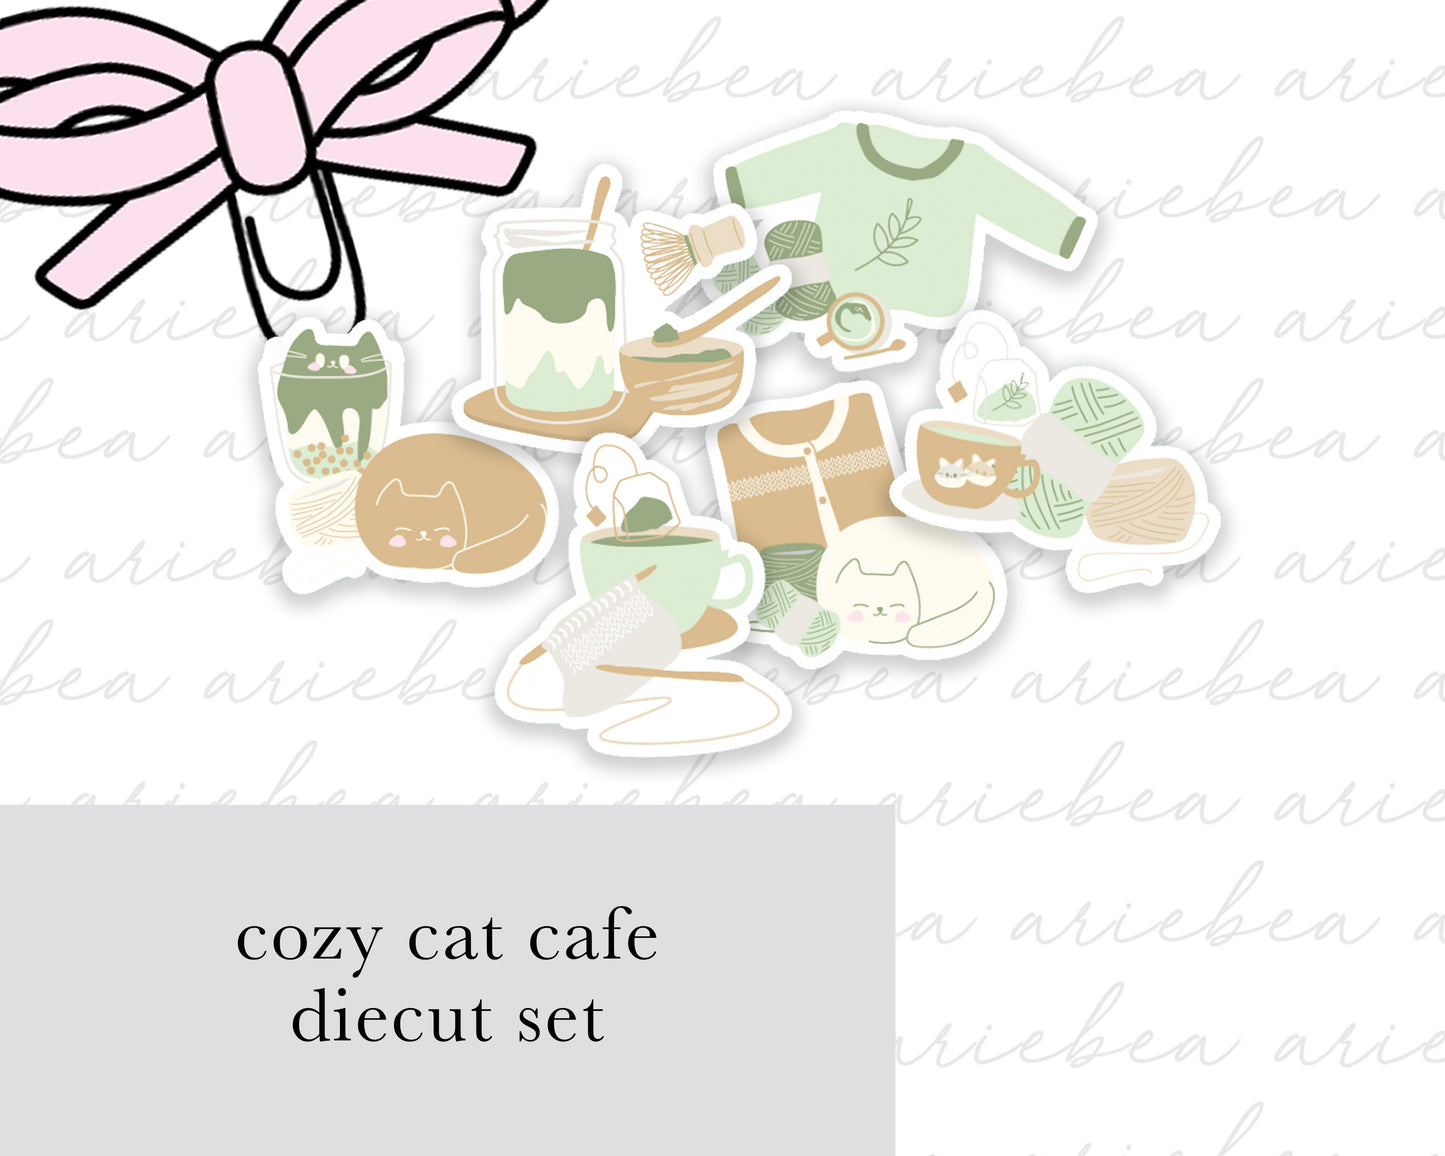 Cozy Cat Cafe Collection Full Kit